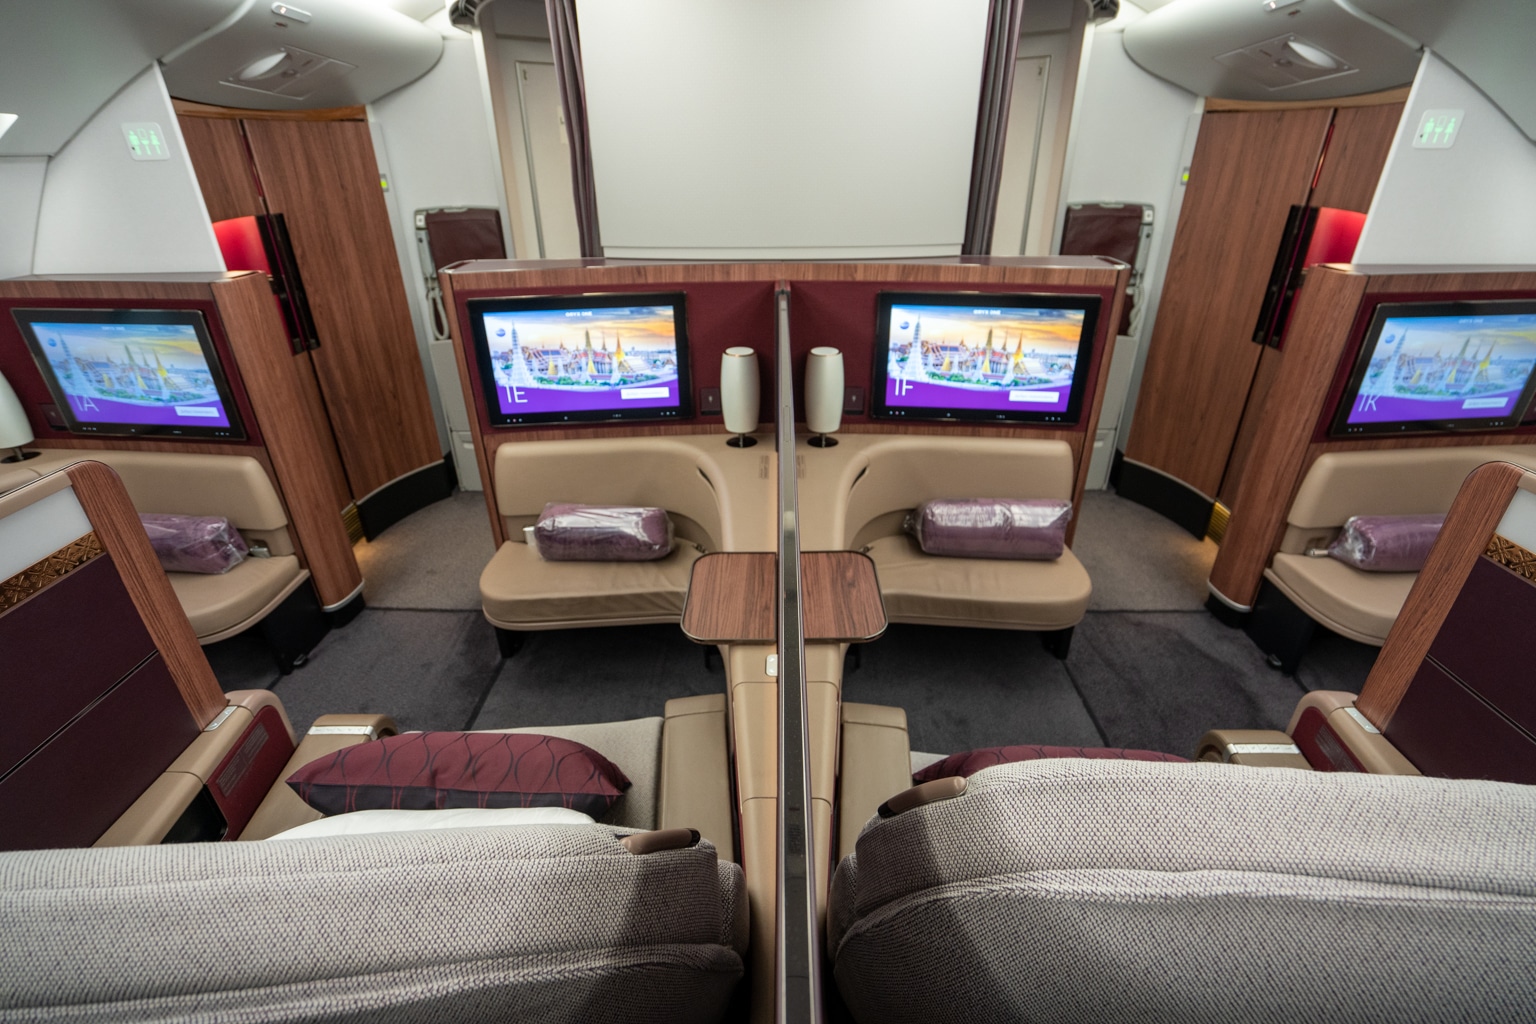 The Complete Guide to Booking Qatar Airways First Class